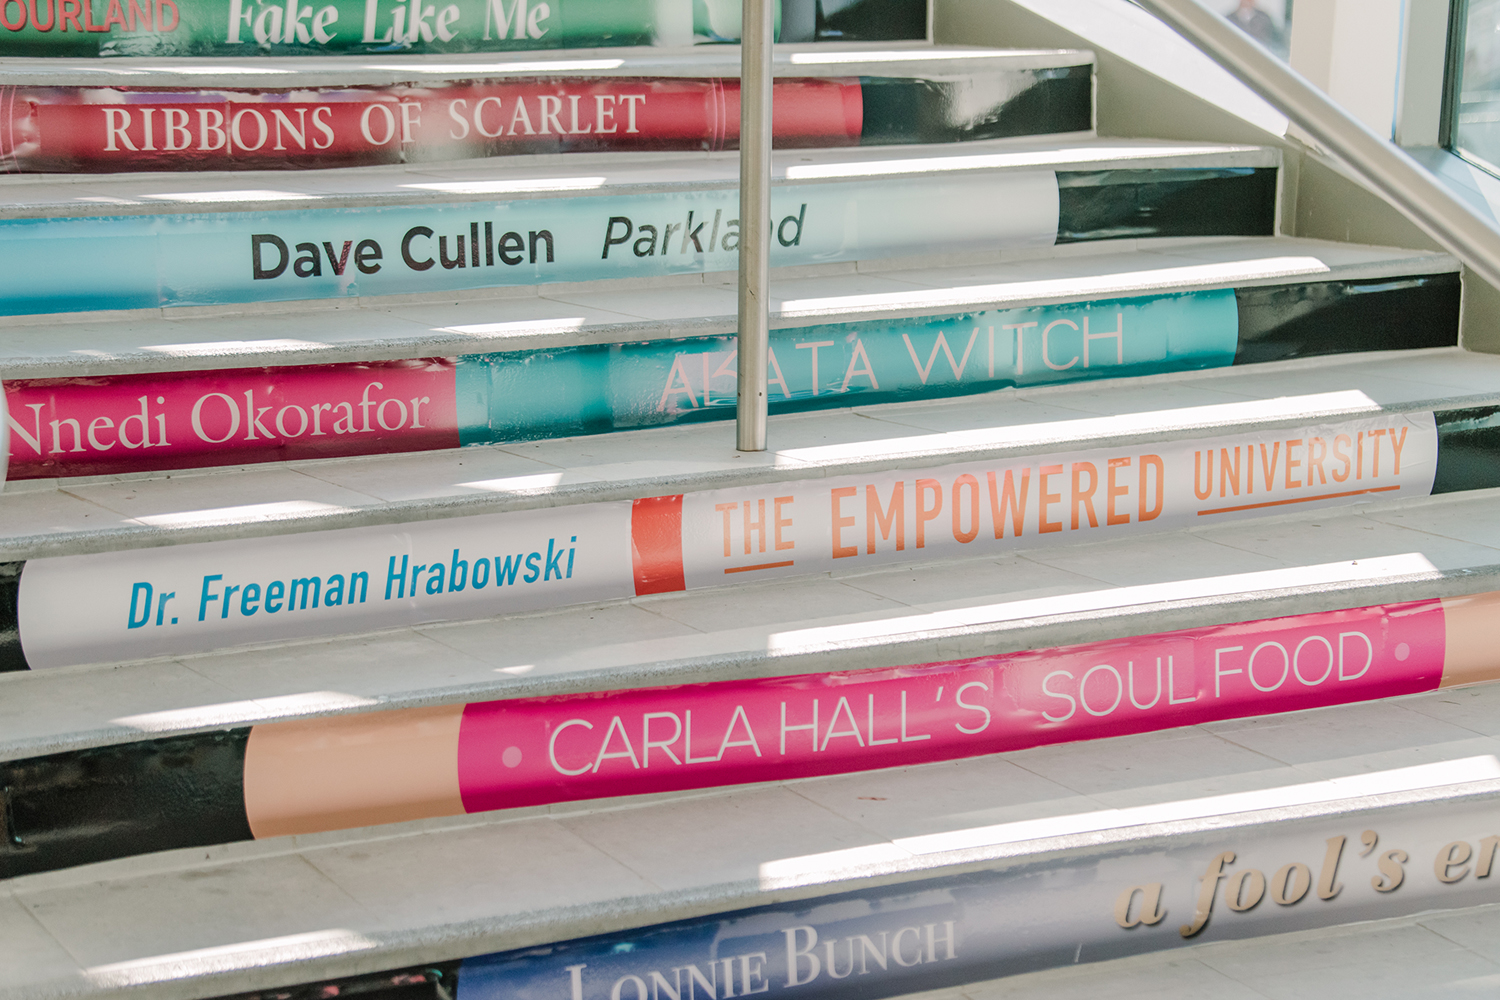 Steps with colorful renditions of book spines